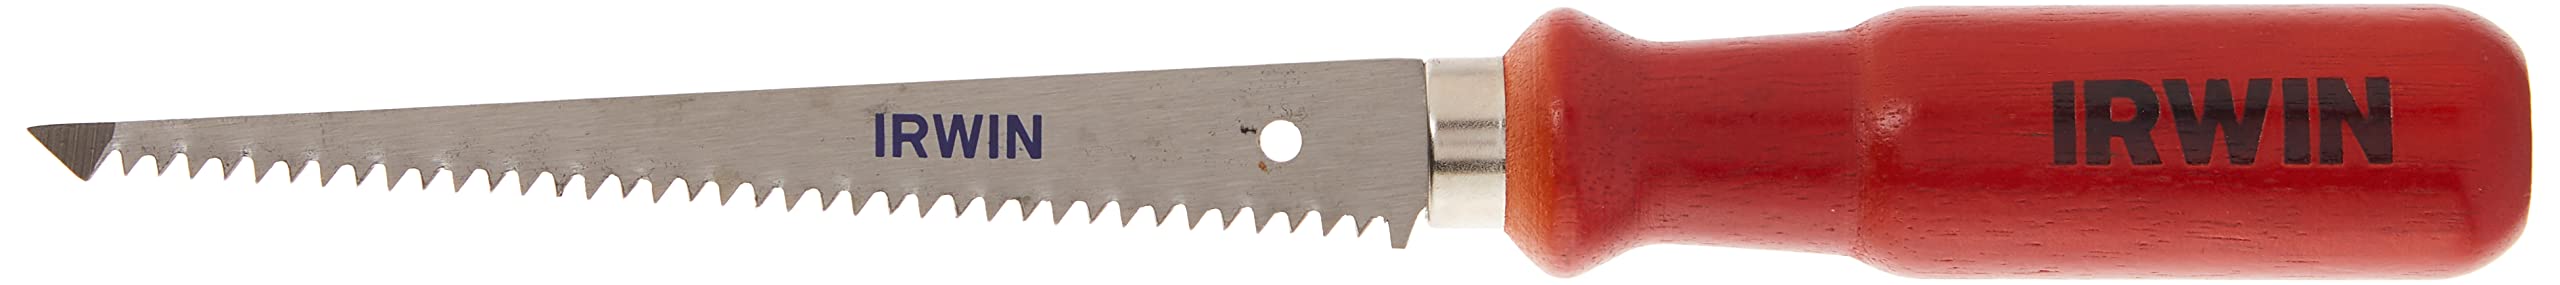 6-1/2" IRWIN Tools Standard Drywall/Jab Saw $3.99 + Free Shipping w/ Prime or on $35+